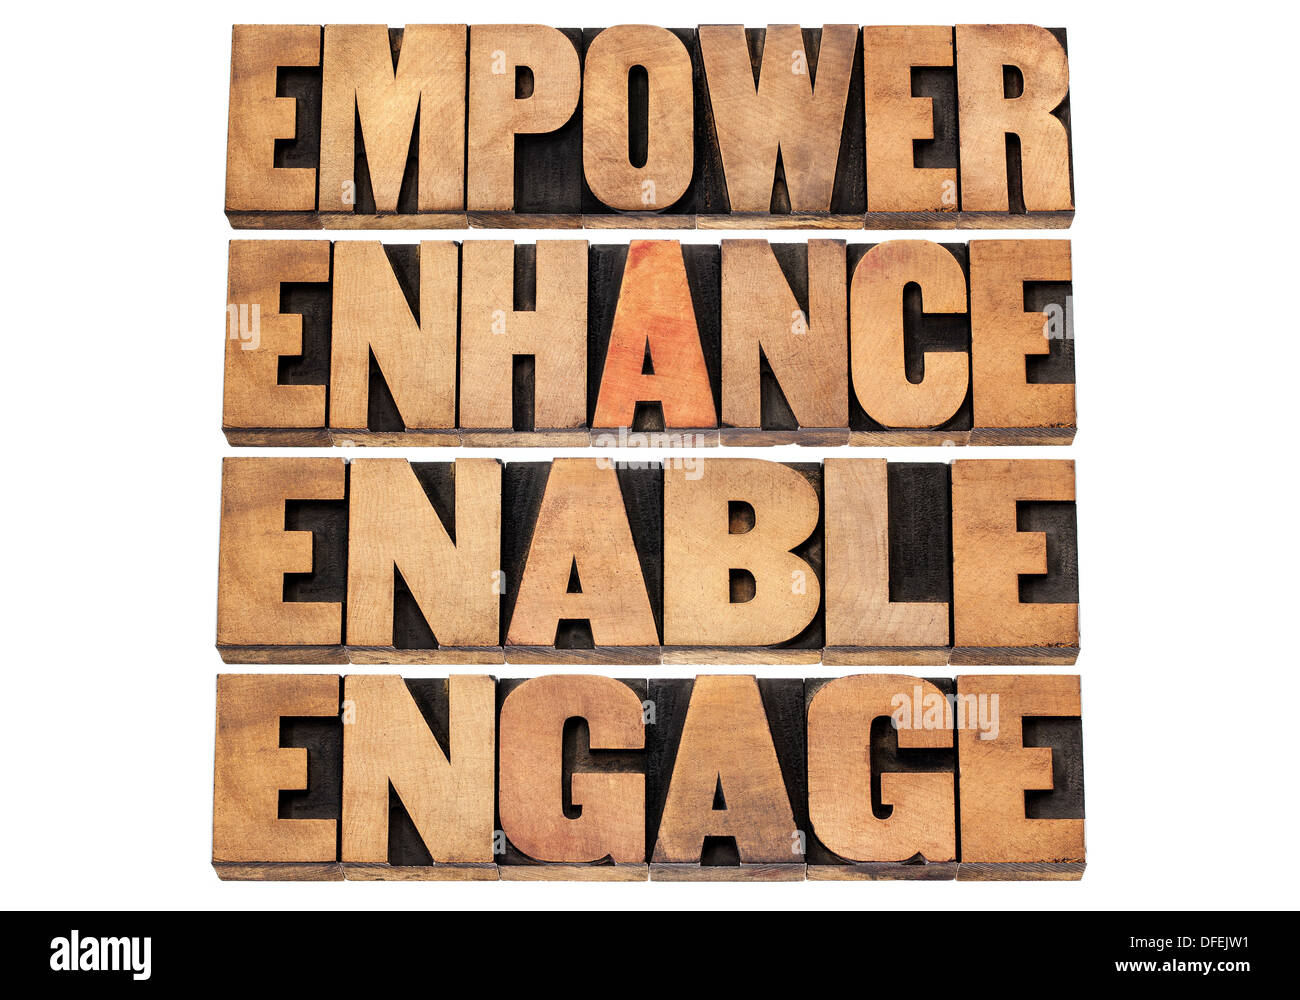 empower, enhance, enable and engage - motivational business concept - a collage of isolated words in letterpress wood type Stock Photo